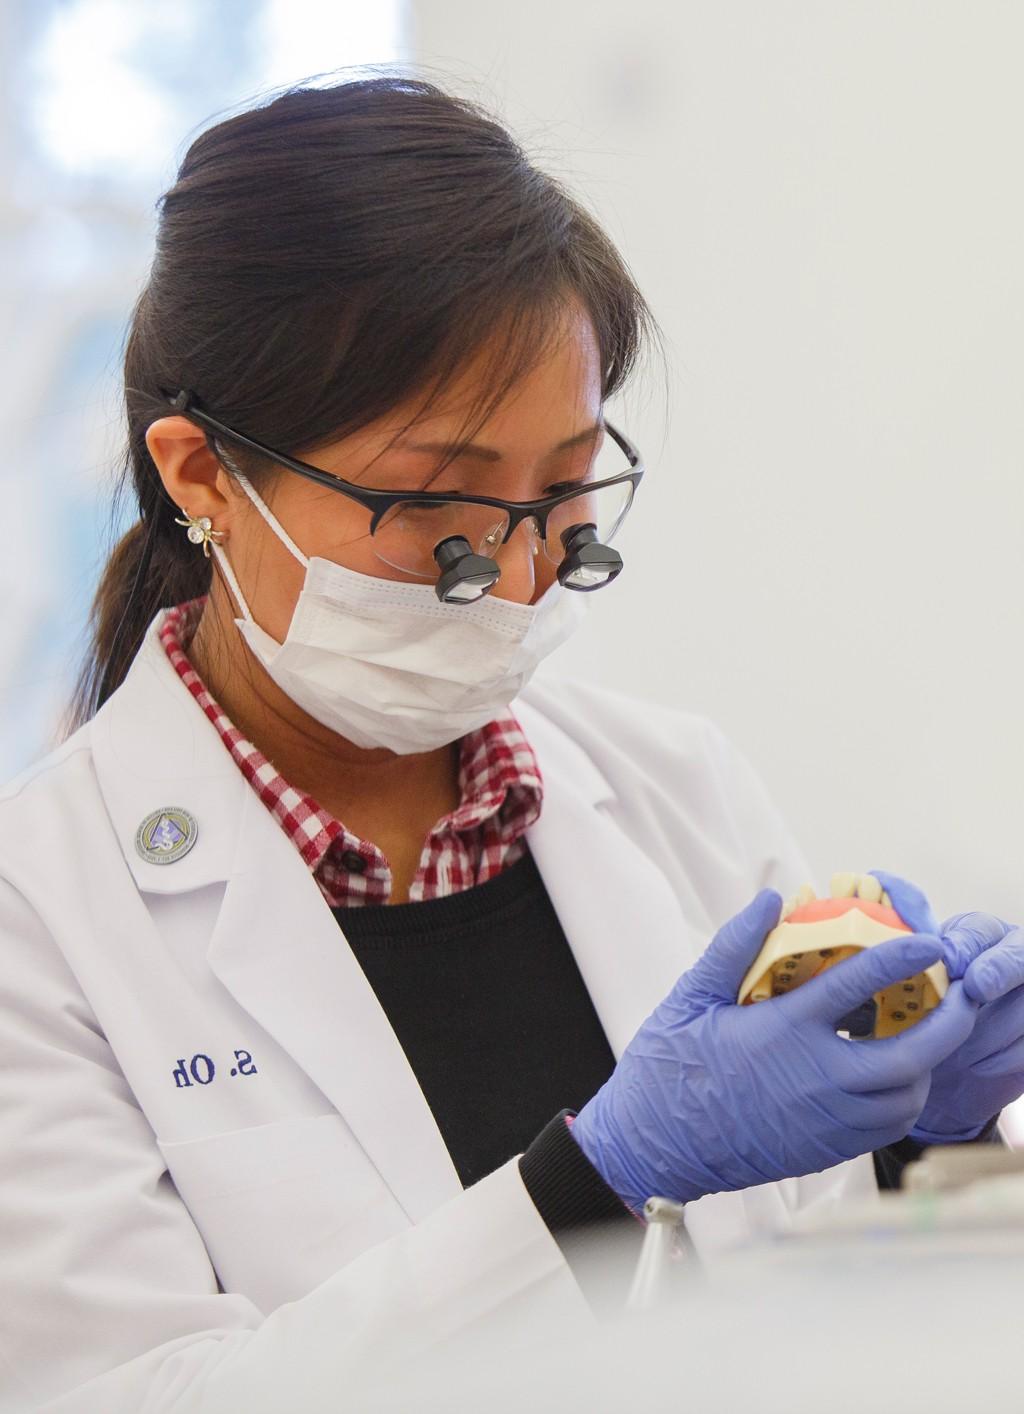 A student wearing a white coat, gloves, mask, and loupes inspects a model of teeth